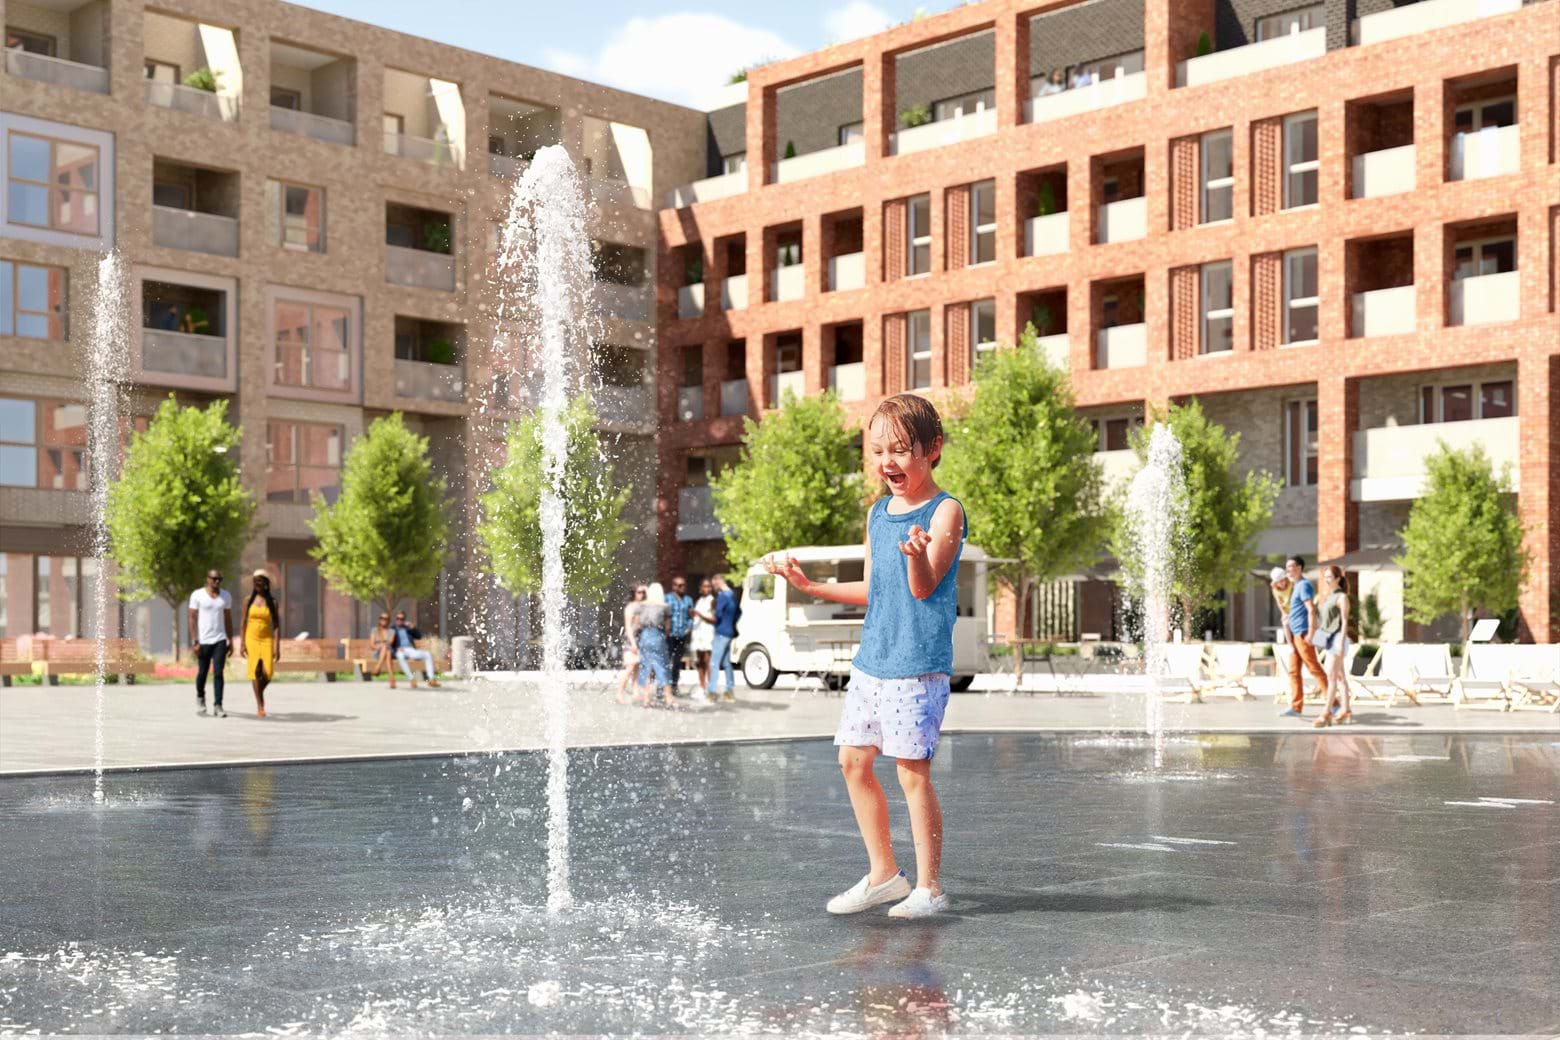 Computer Generated Image of Cygnet Square at Southmere